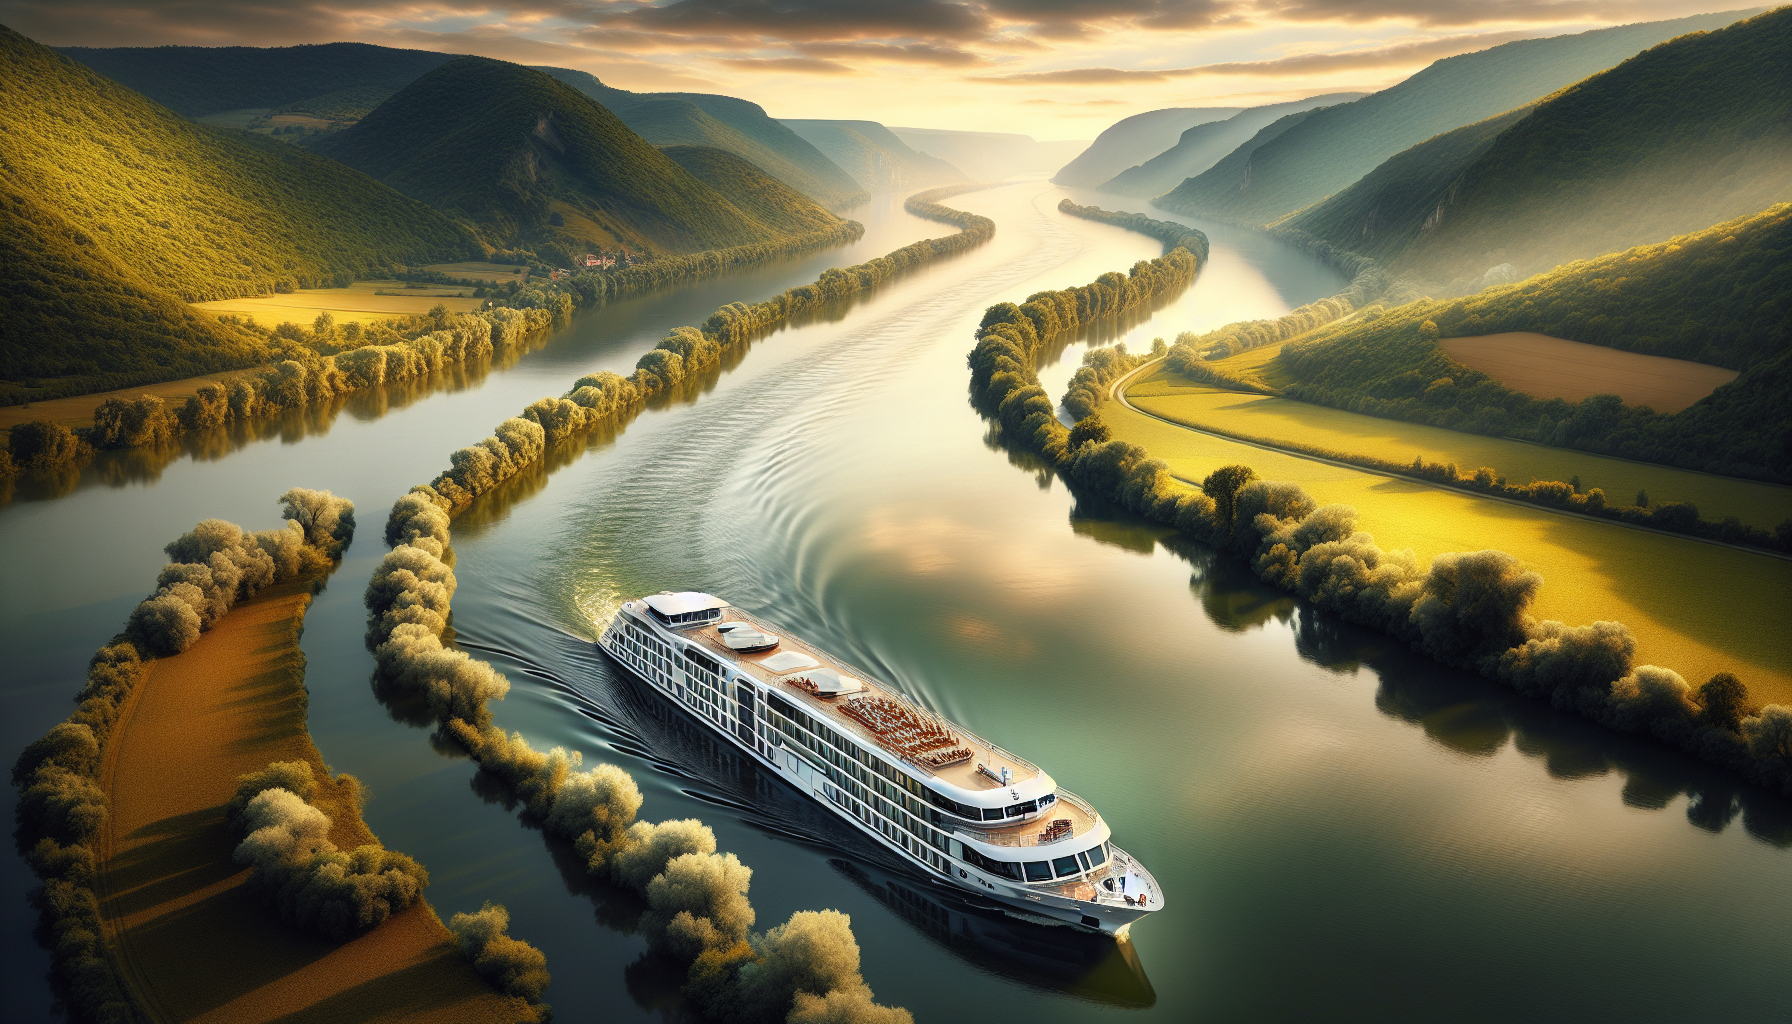 discover why enchanting river cruises are the perfect getaway. experience scenic beauty, cultural immersion, and relaxation with our river cruise trips.